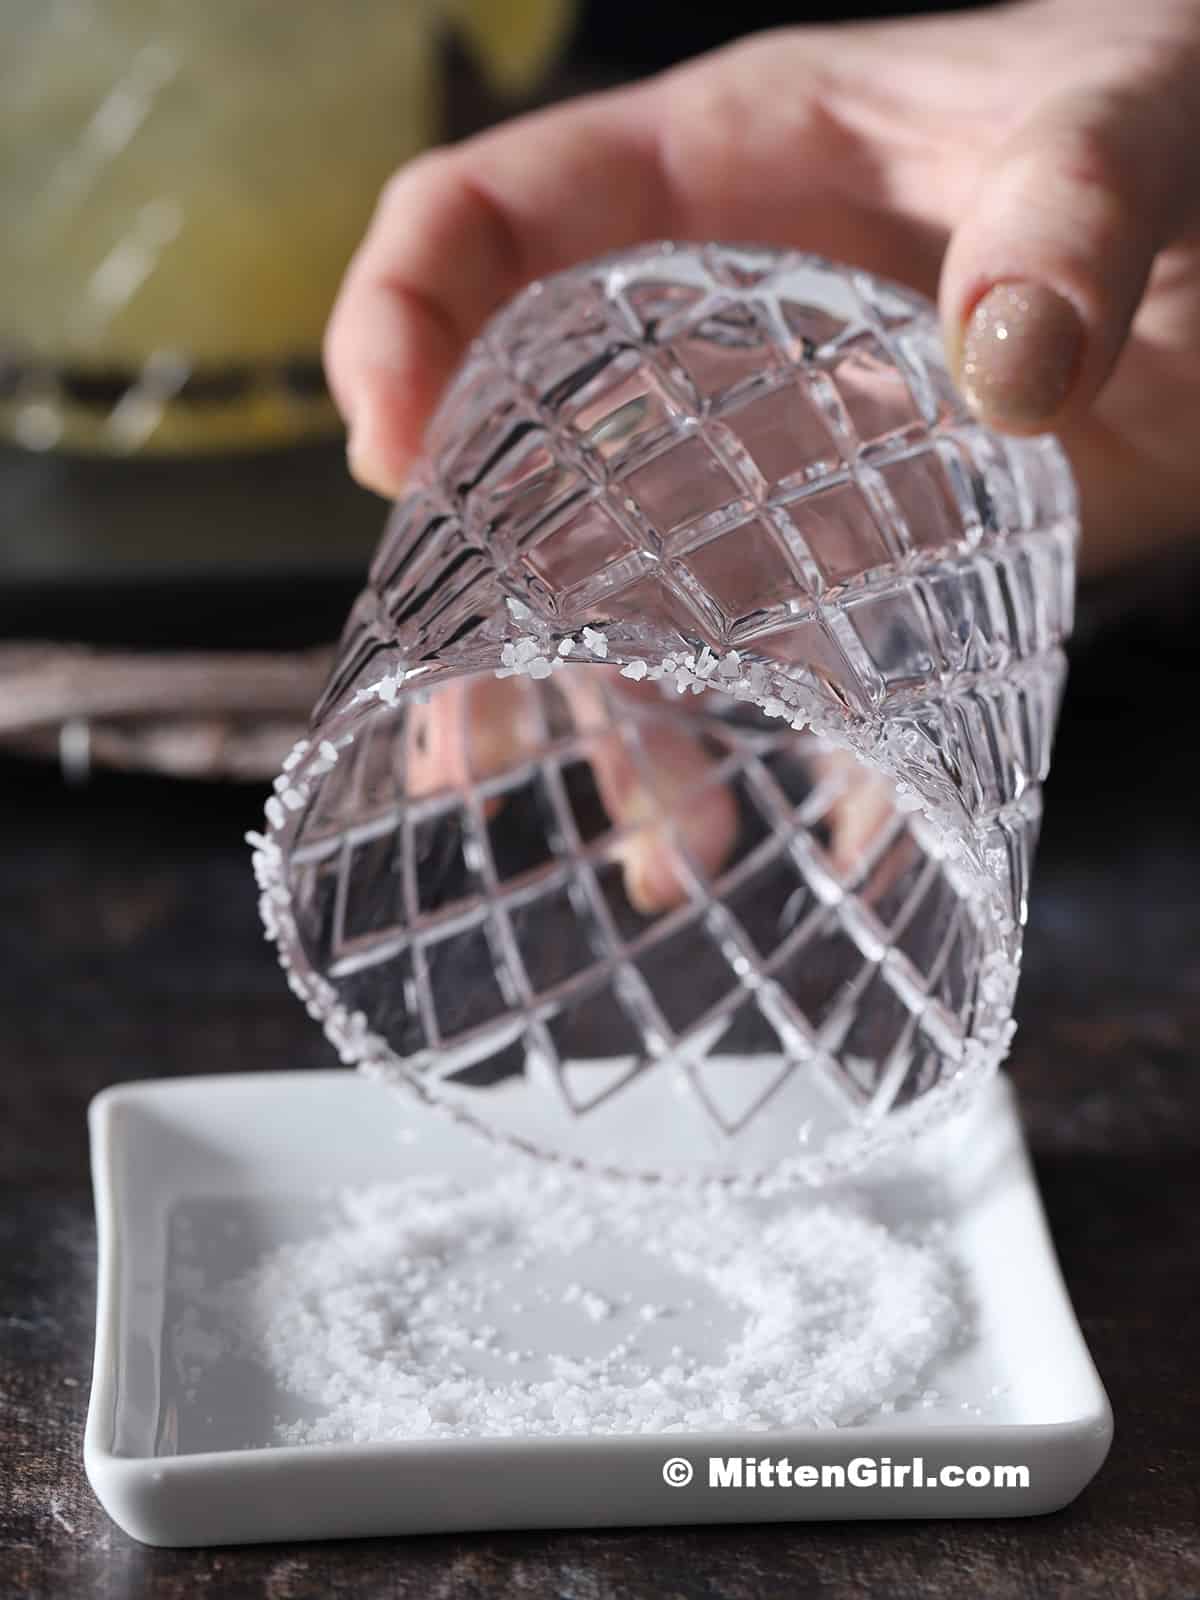 A hand dipping a rocks glass in course salt.